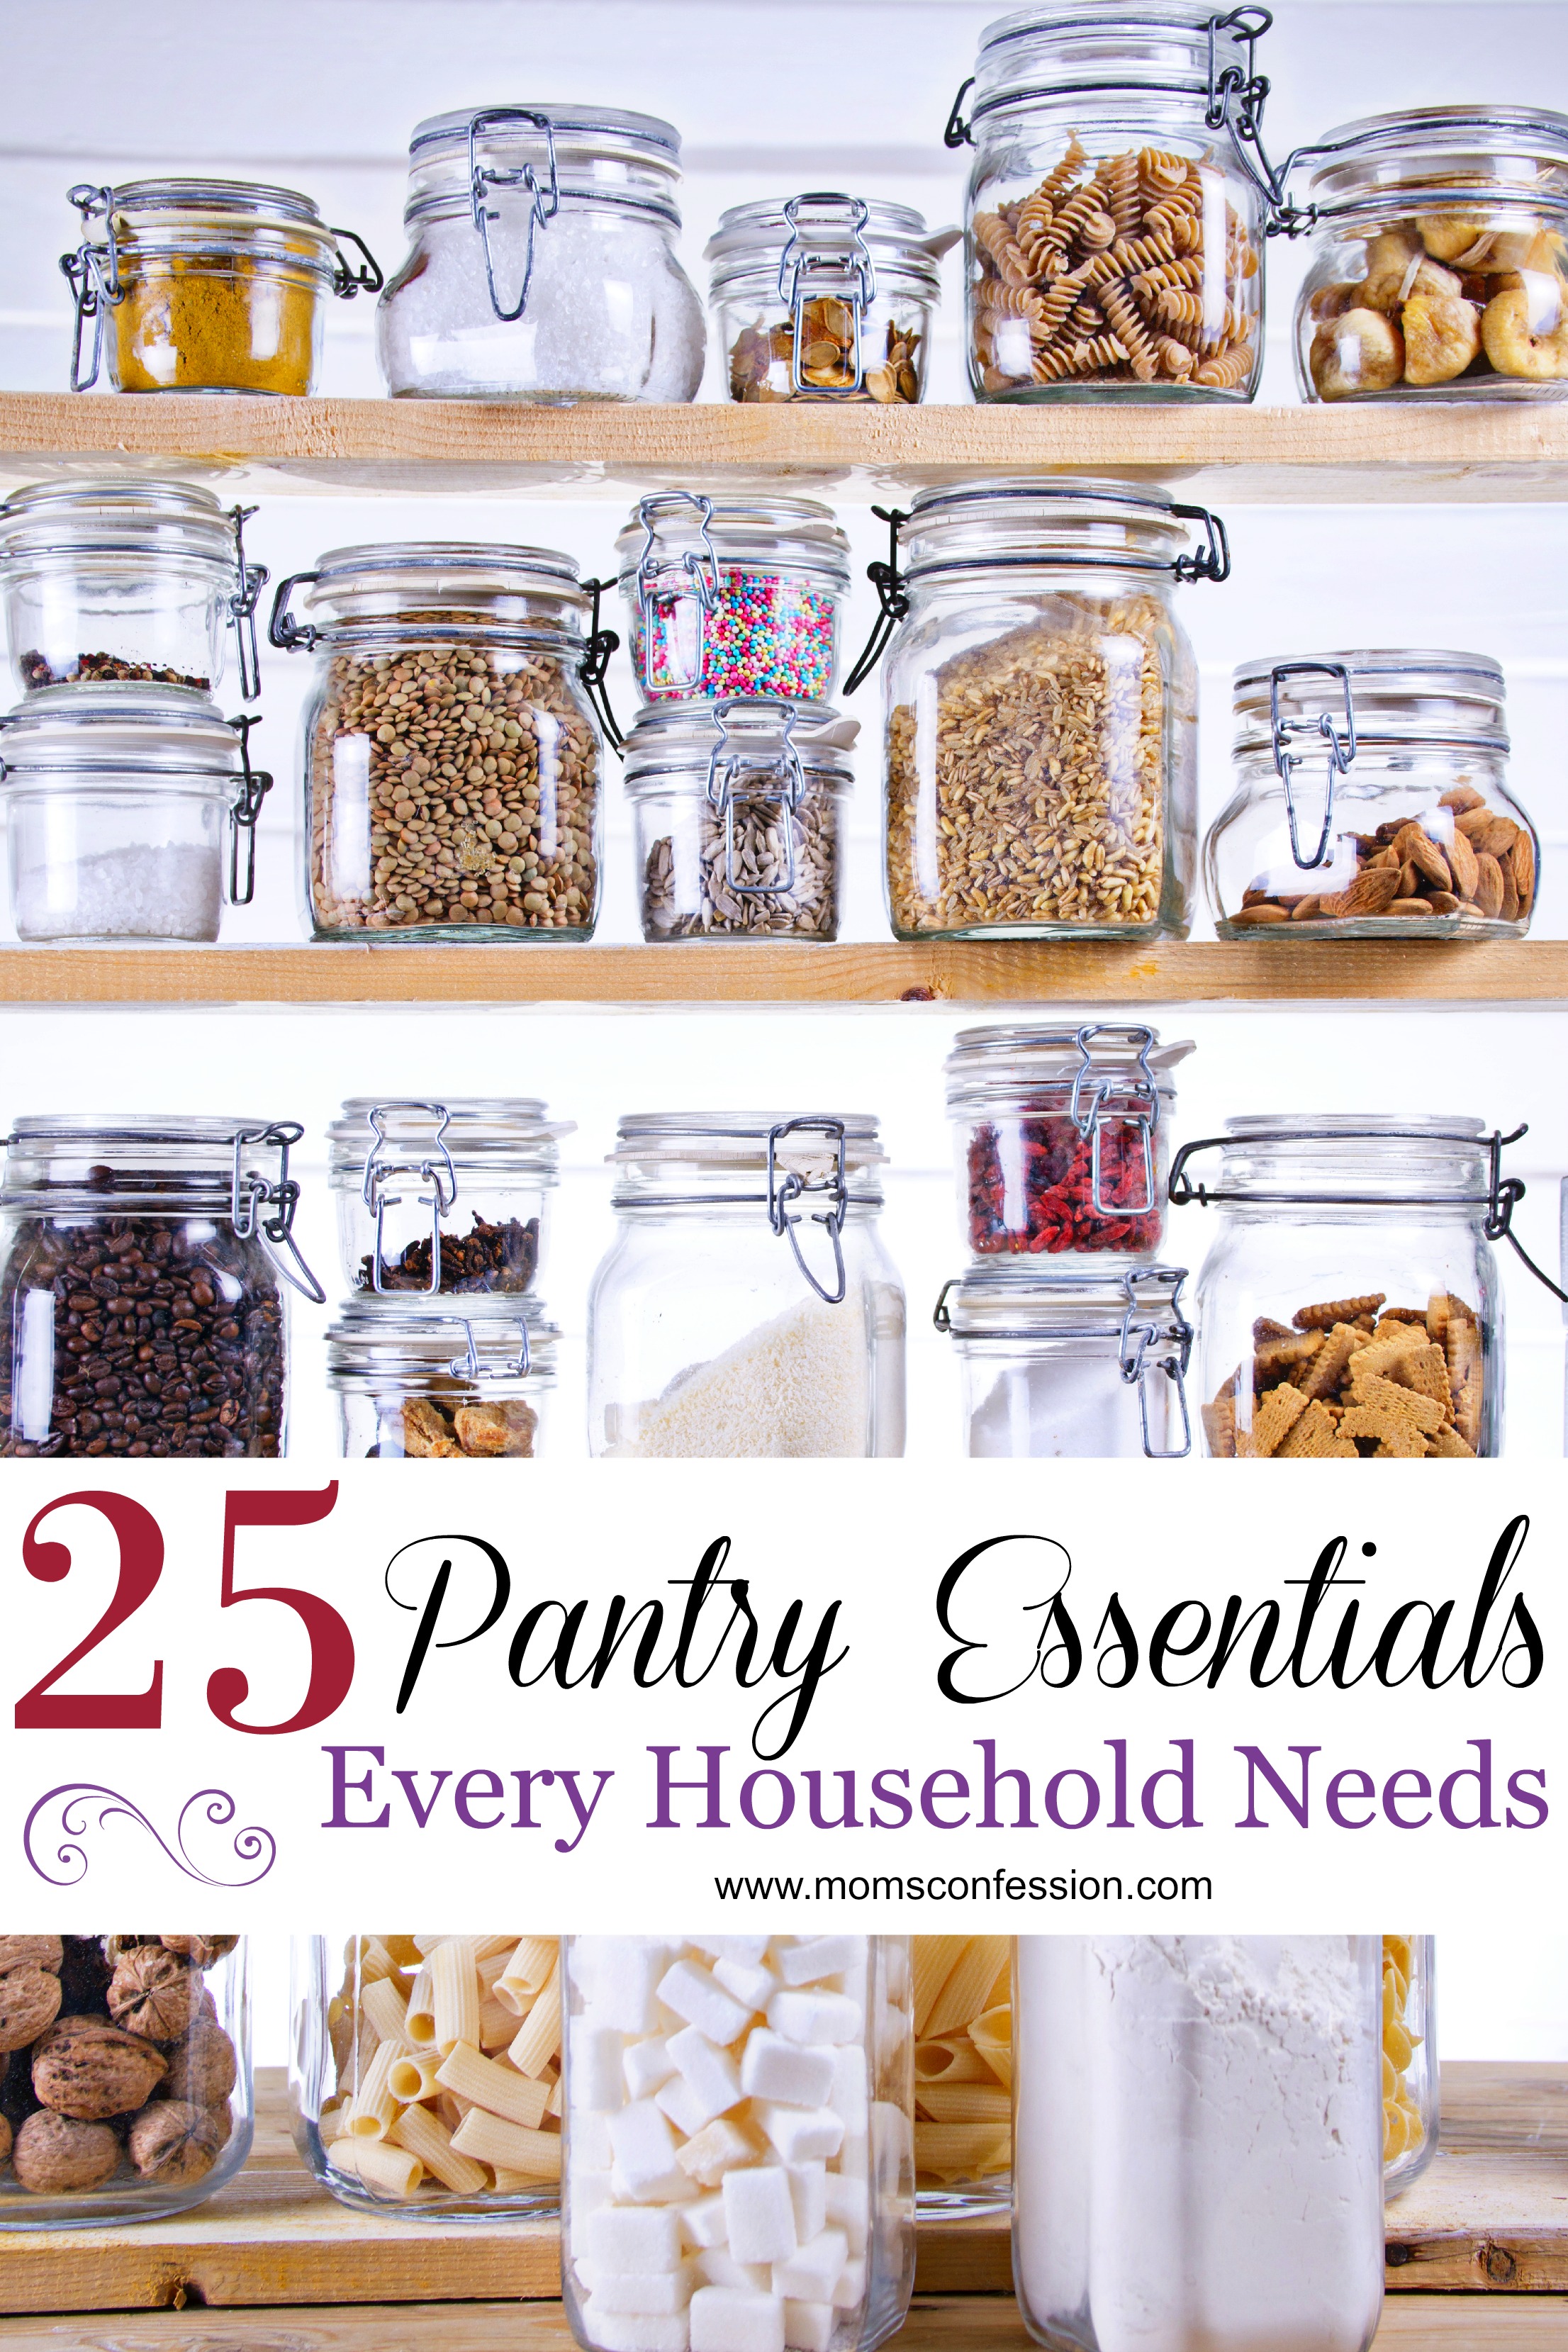 Essential Items Every Household Needs - Food Storage Moms